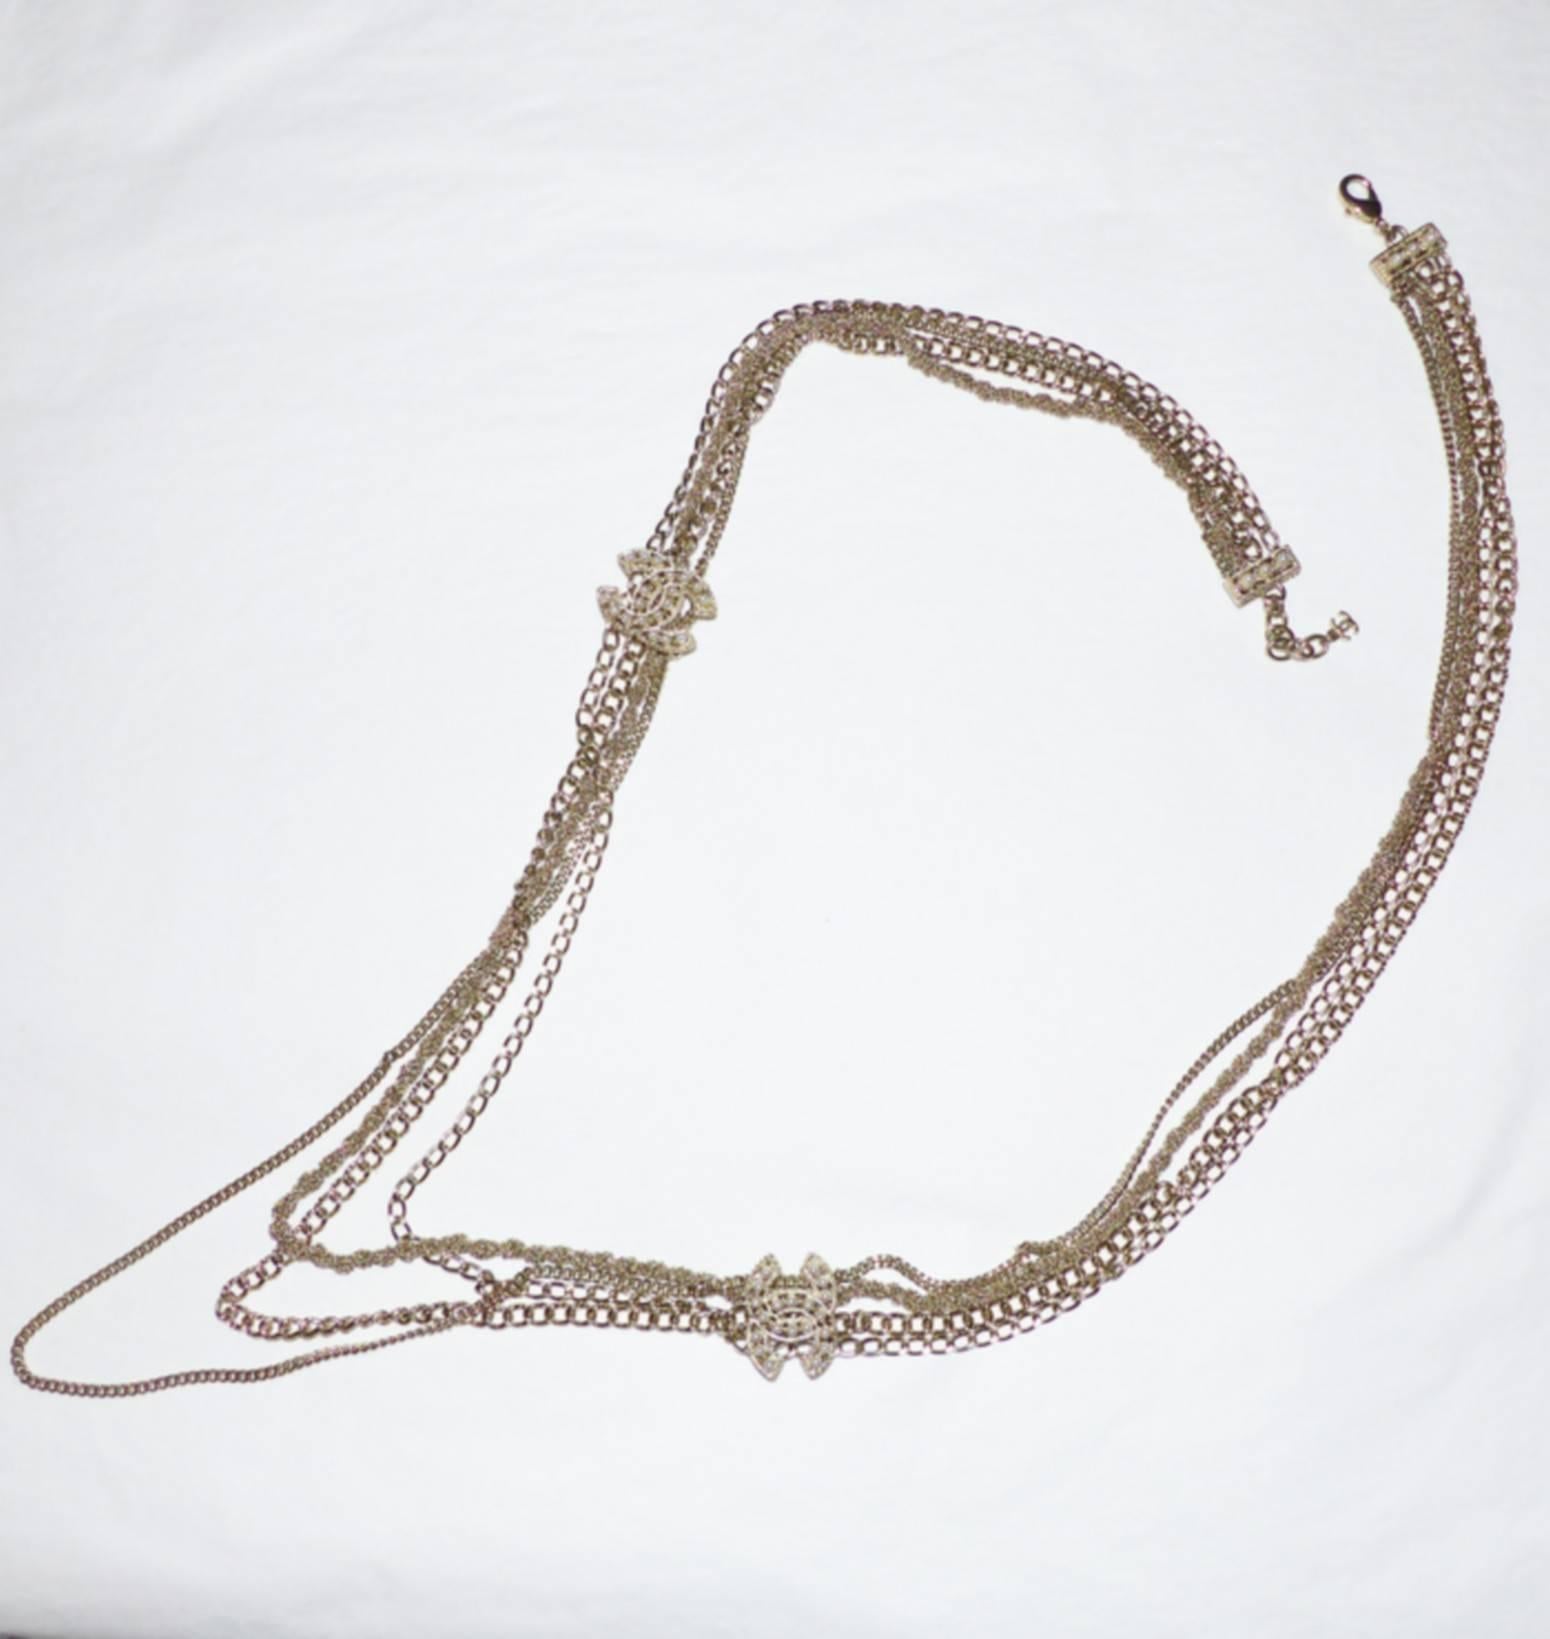 Beautiful Chanel sautoir necklace in light golden brushed metal
2016 Collection - Limited Edition
Multi link chain, gourmet and braided
2 large chanel double C thick embellished with ivory pearls
Lobster and chain closure
Chanel signature